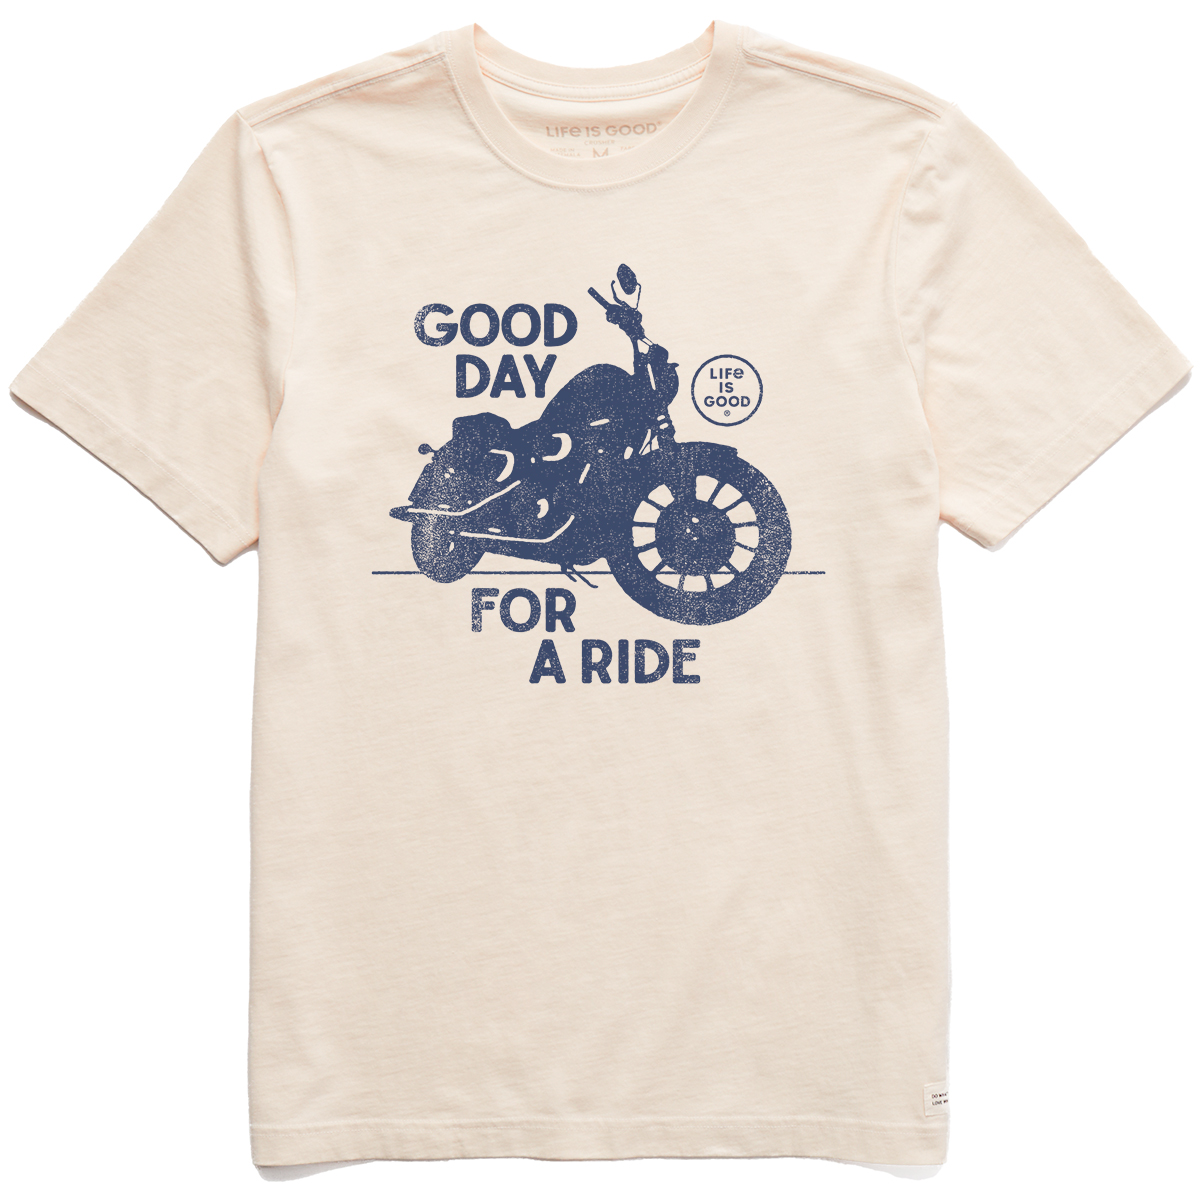 Life Is Good Men's Good Day For A Ride Short-Sleeve Tee